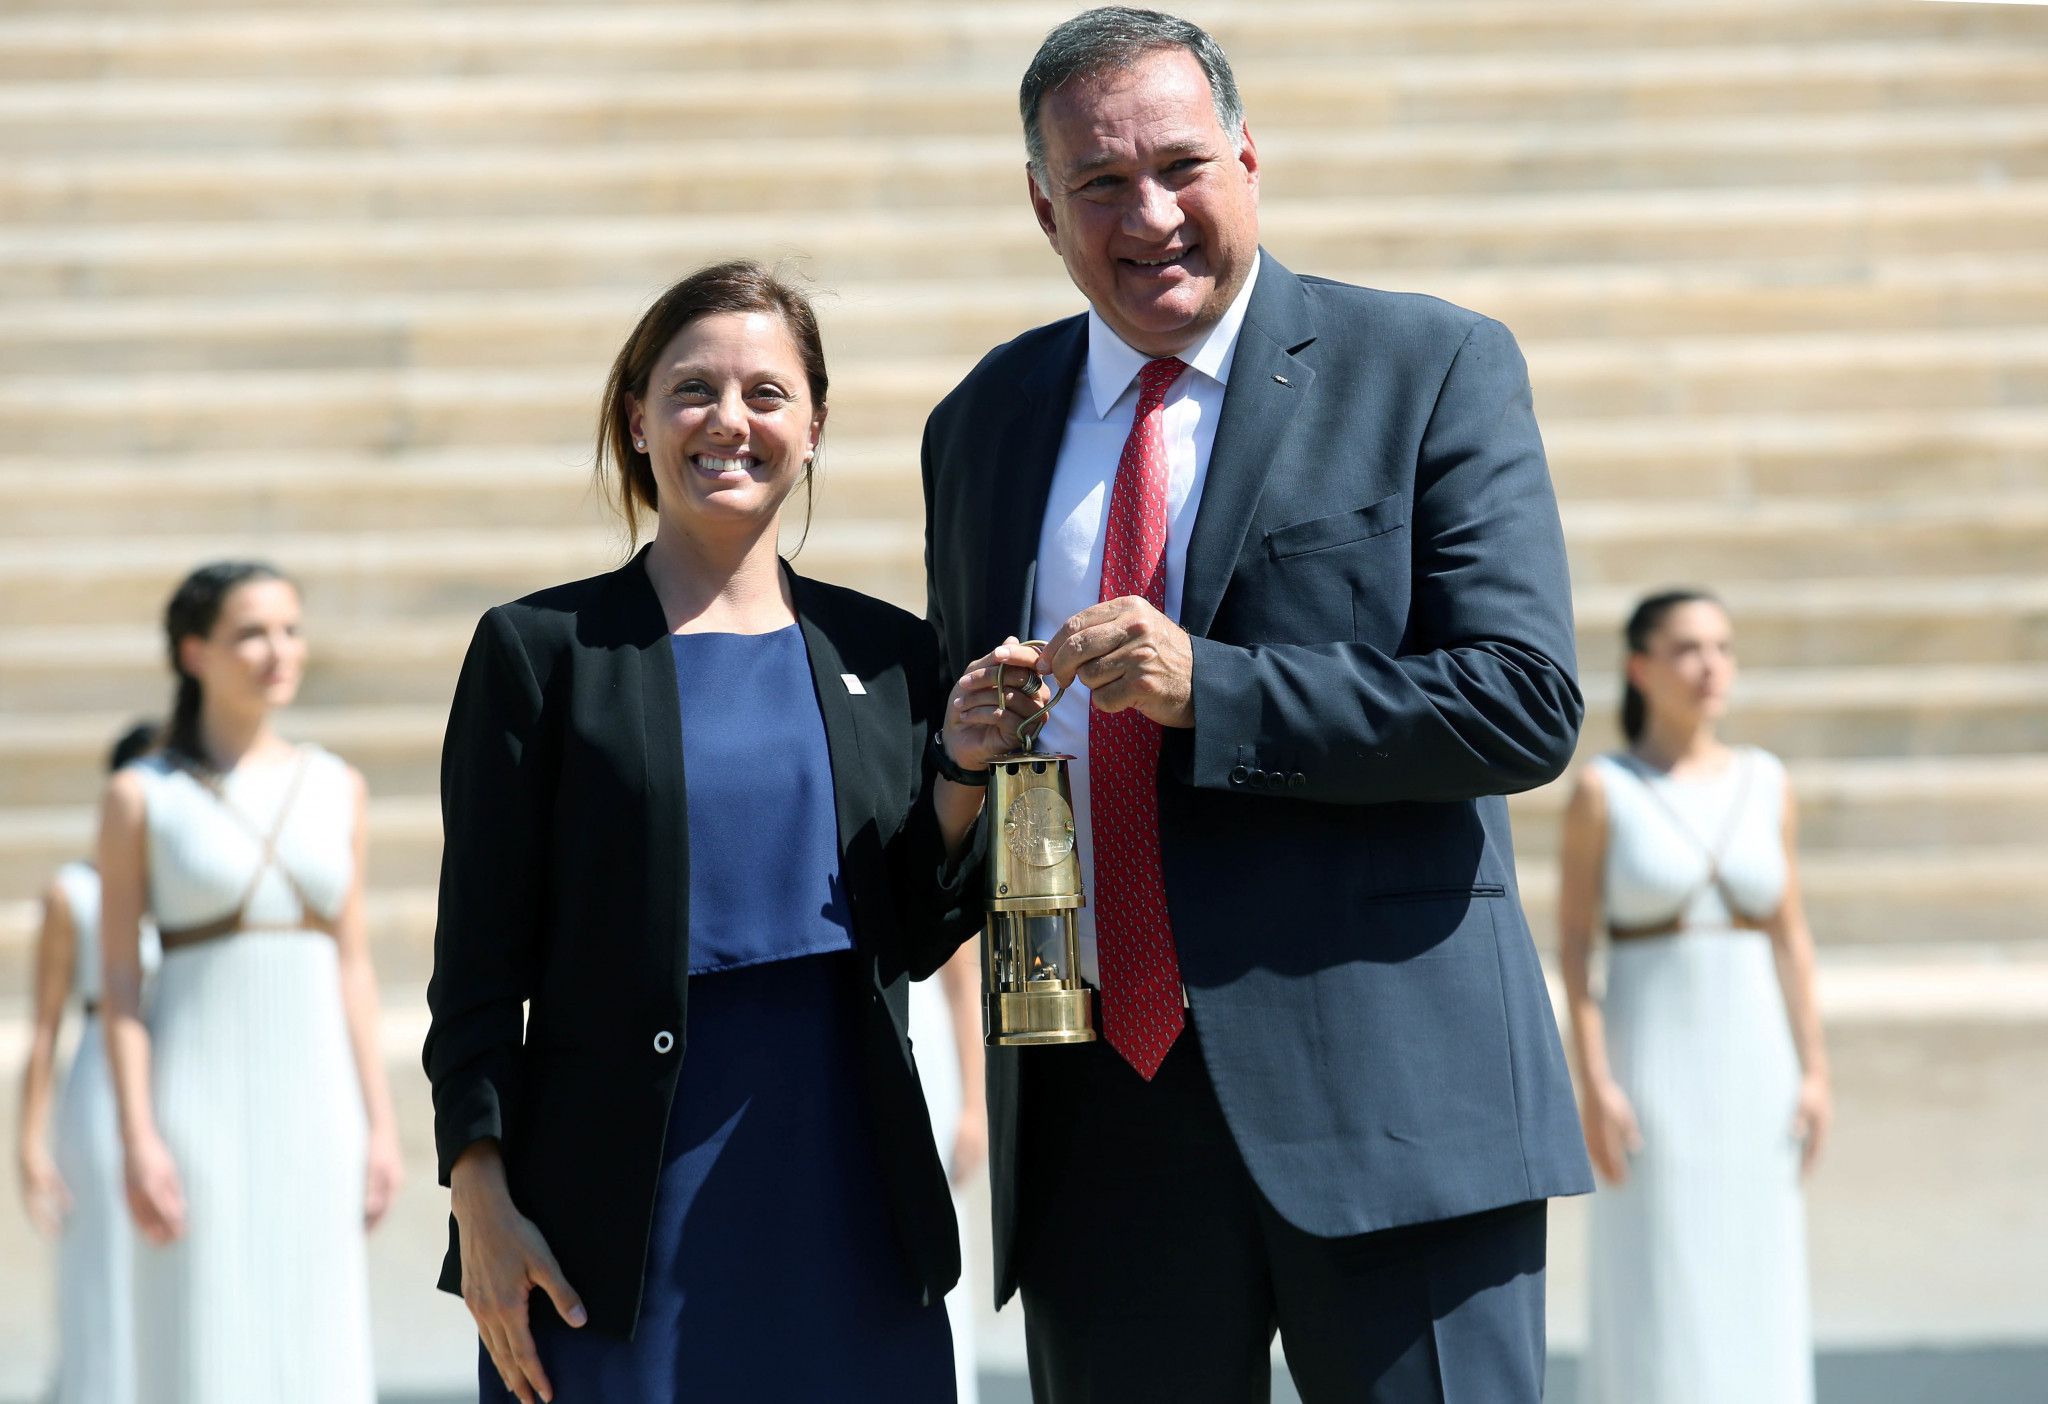 Lausanne 2020 President Virginie Faivre received the flame from Hellenic Olympic Committee President Spyros Capralos ©Hellenic Olympic Committee